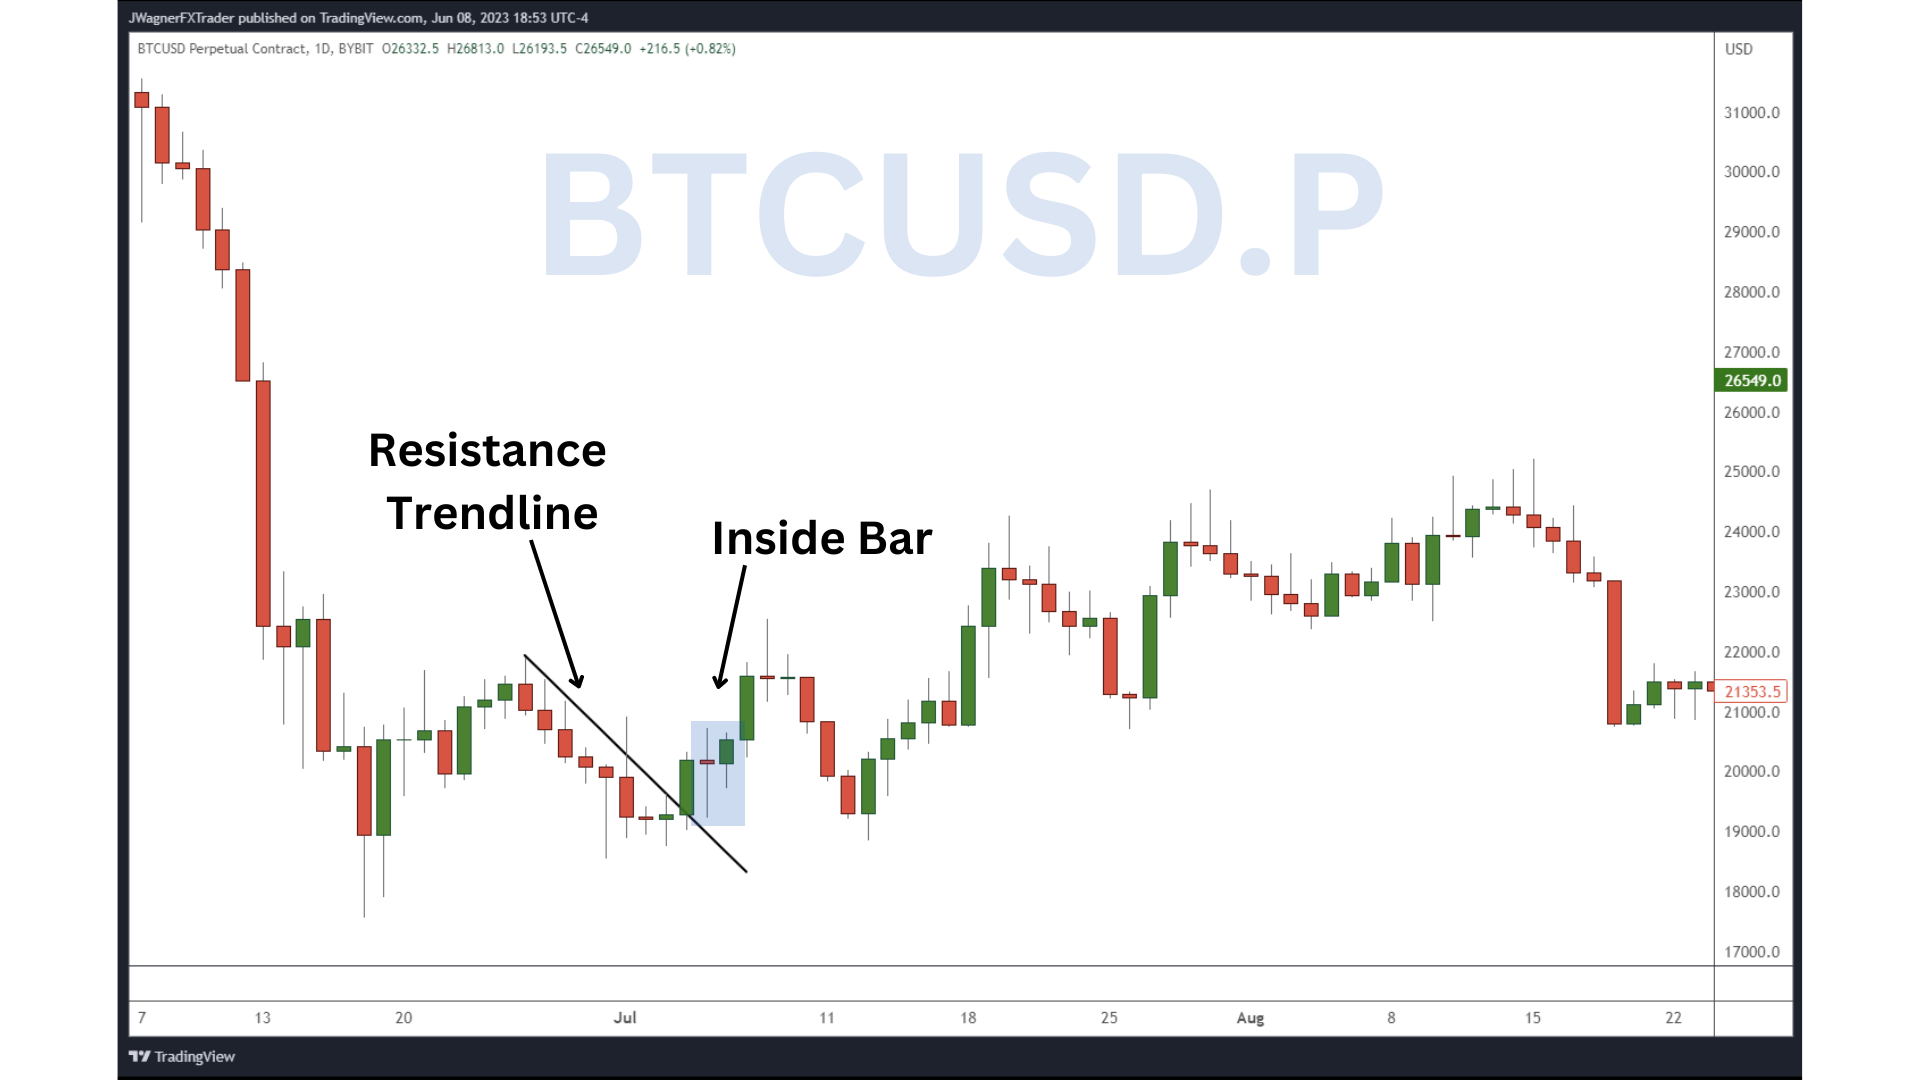 BTCUSD perpetual contract with resistance trendline and inside bar.